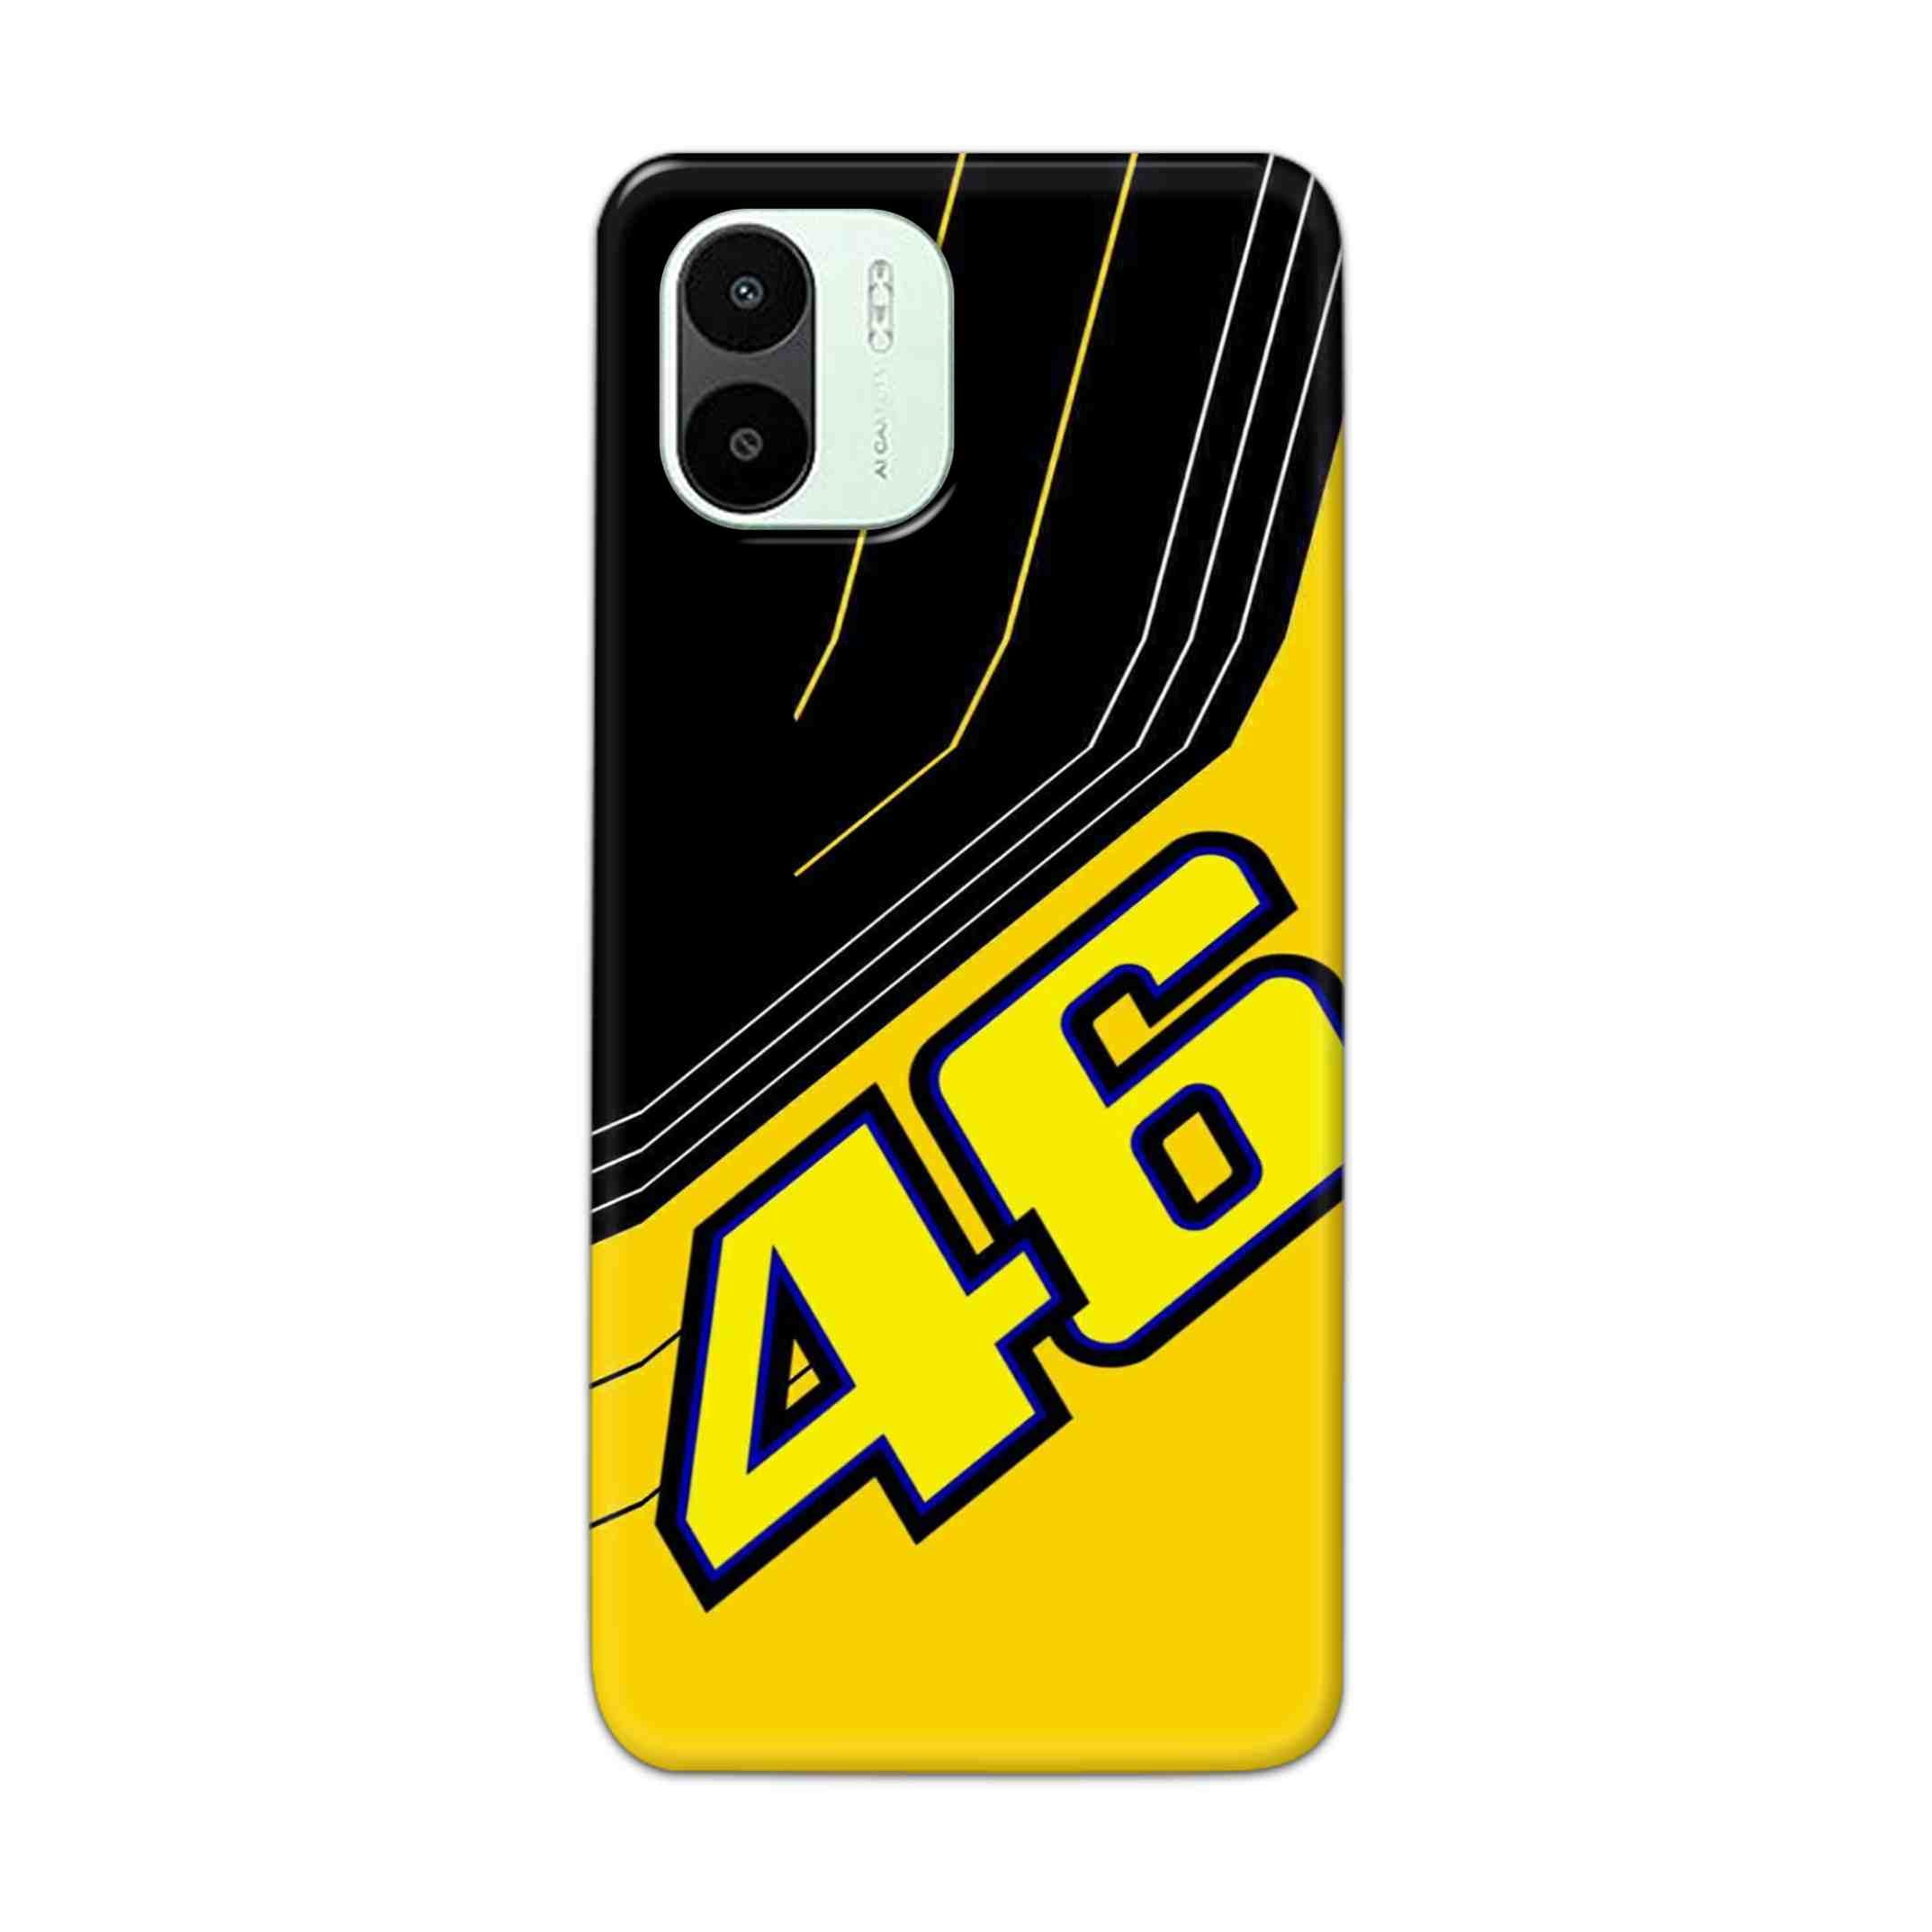 Buy 46 Hard Back Mobile Phone Case Cover For Xiaomi Redmi A1 5G Online